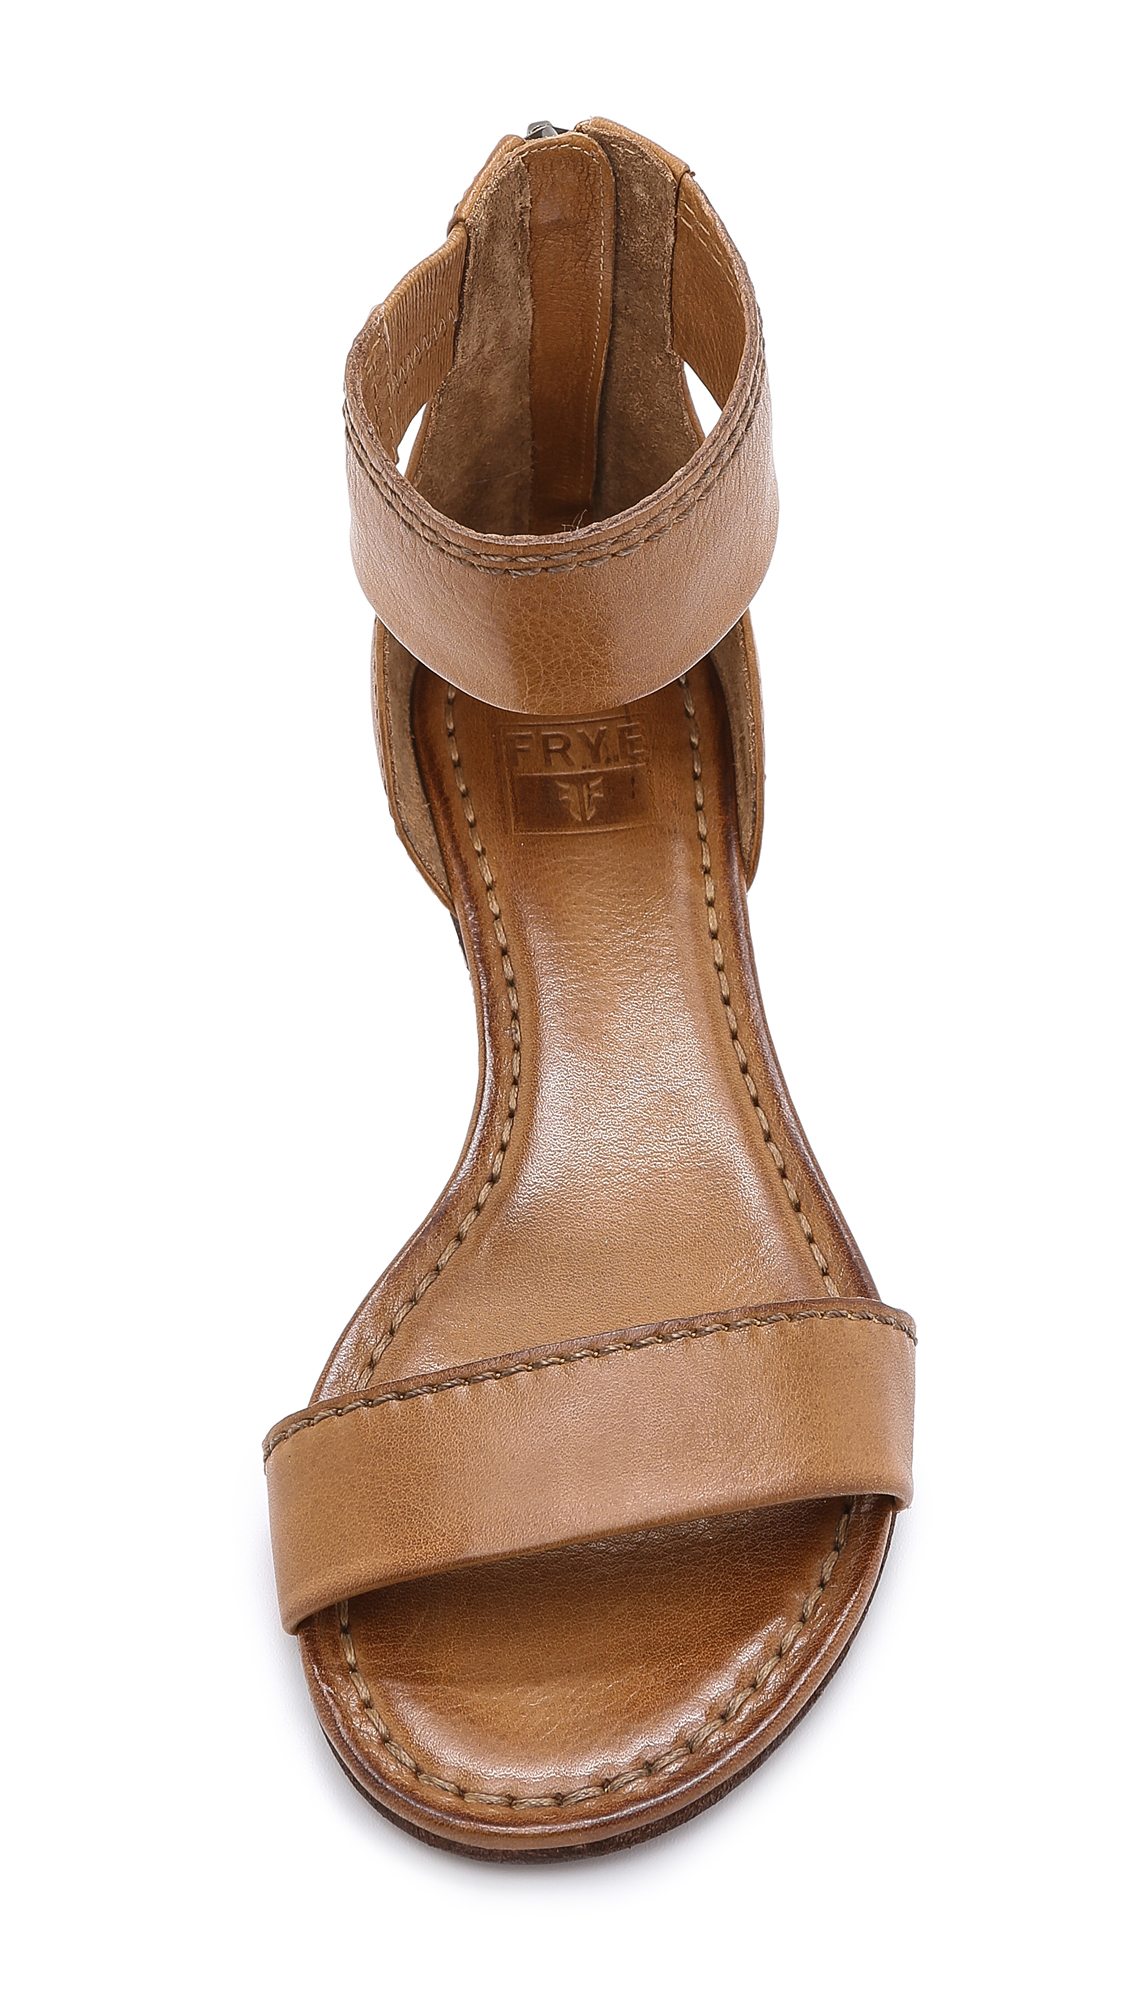 Frye Carson Ankle Zip Flat Sandals - Camel in Natural | Lyst